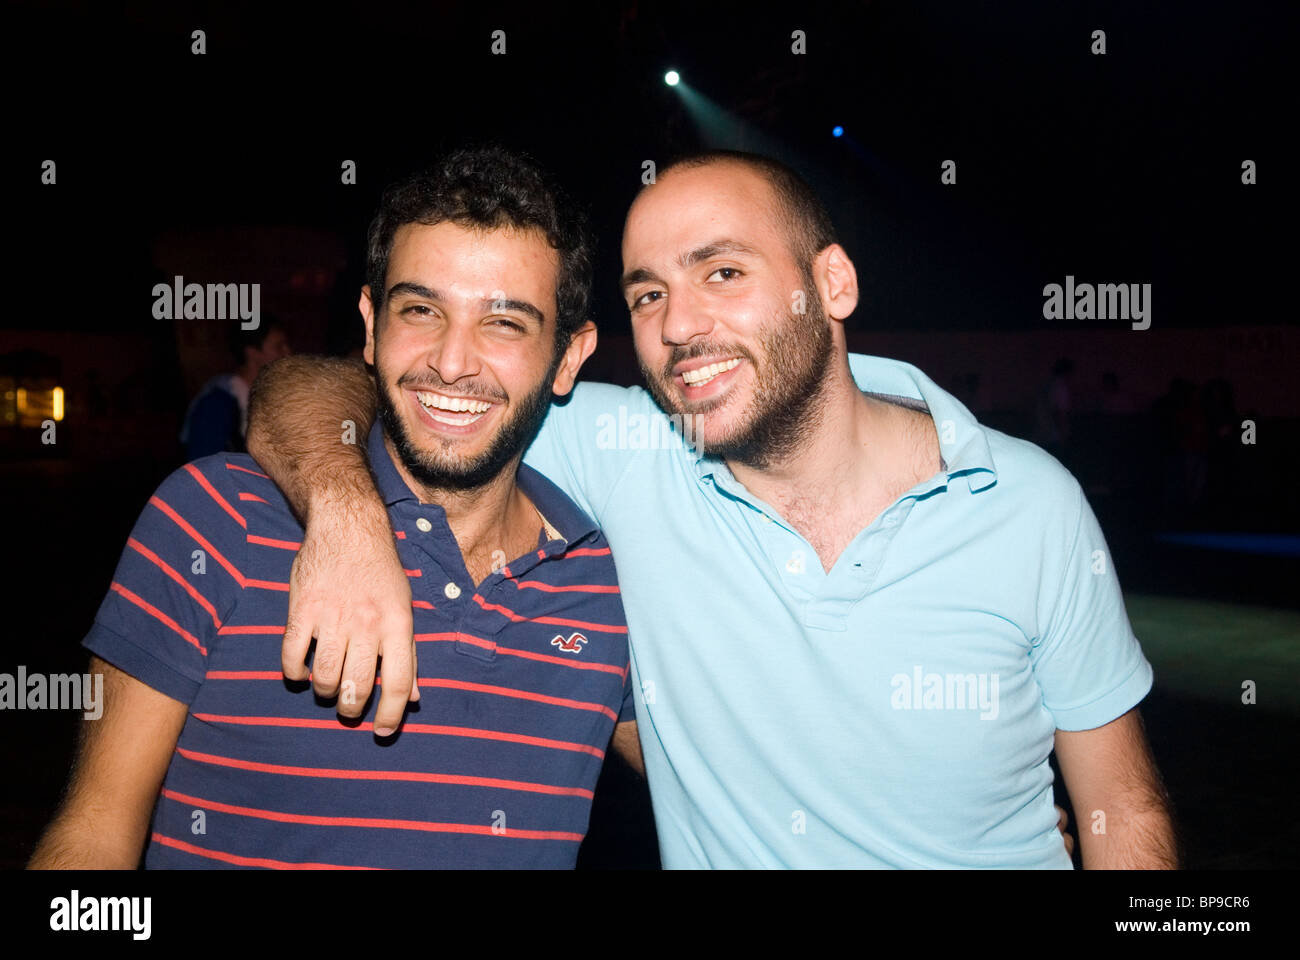 Two Lebanese guys laughing at night Beirut Lebanon Middle East Stock Photo